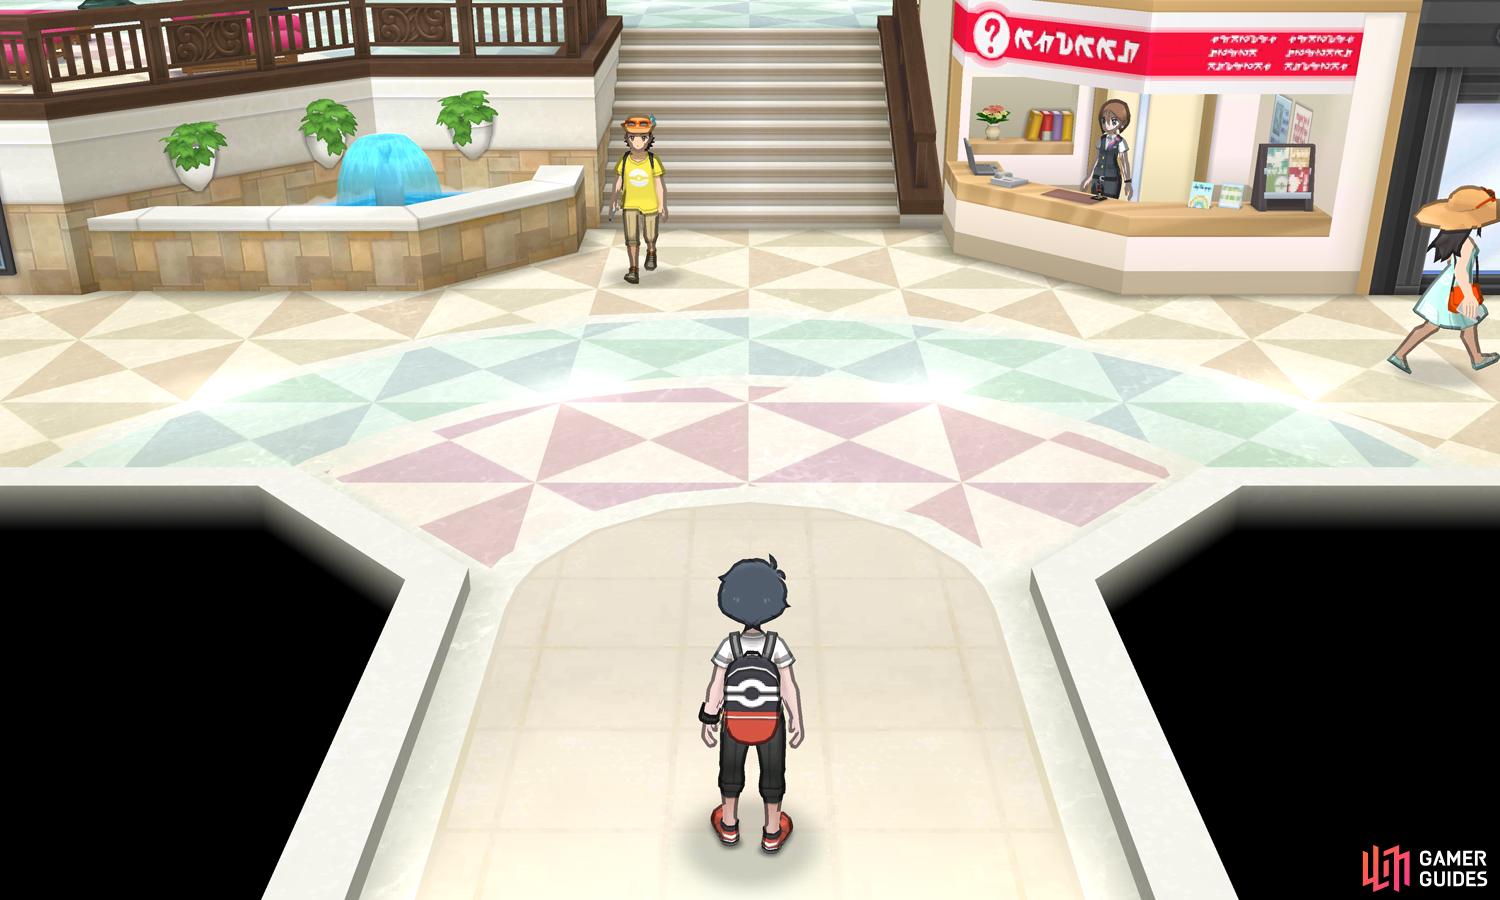 The shopping mall was easily missed in Sun and Moon.